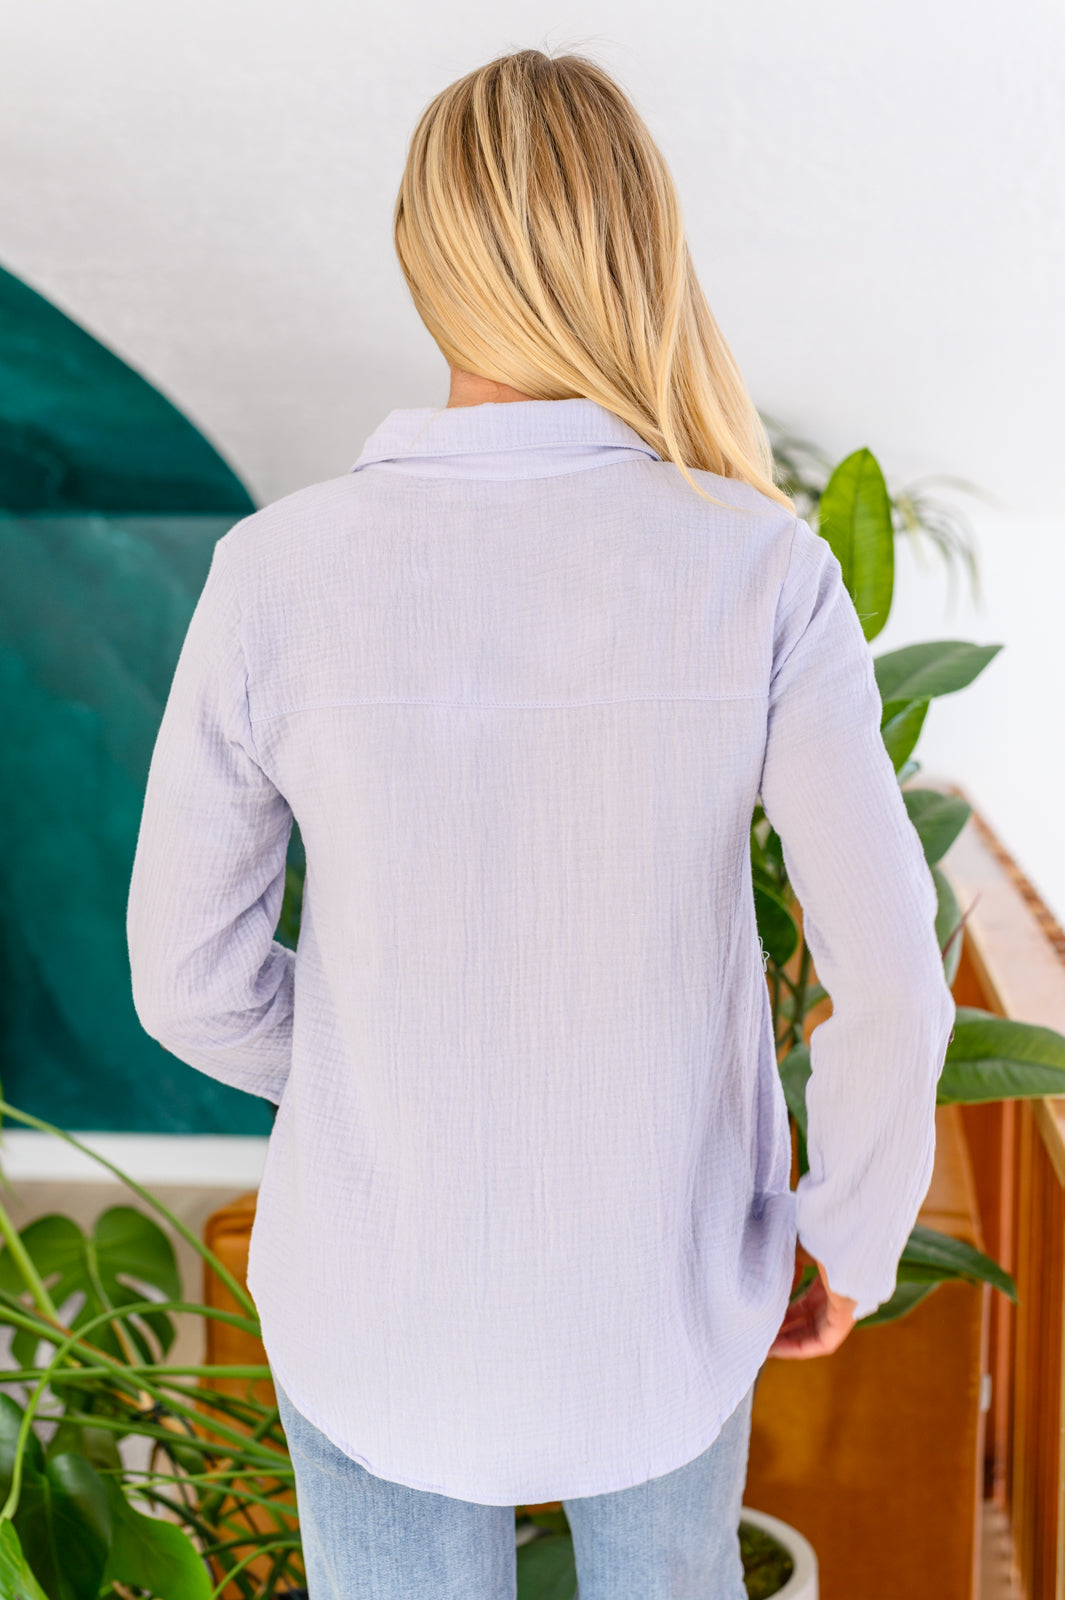 Skies The Limit Button Up in Lavender Blue Womens Southern Soul Collectives 